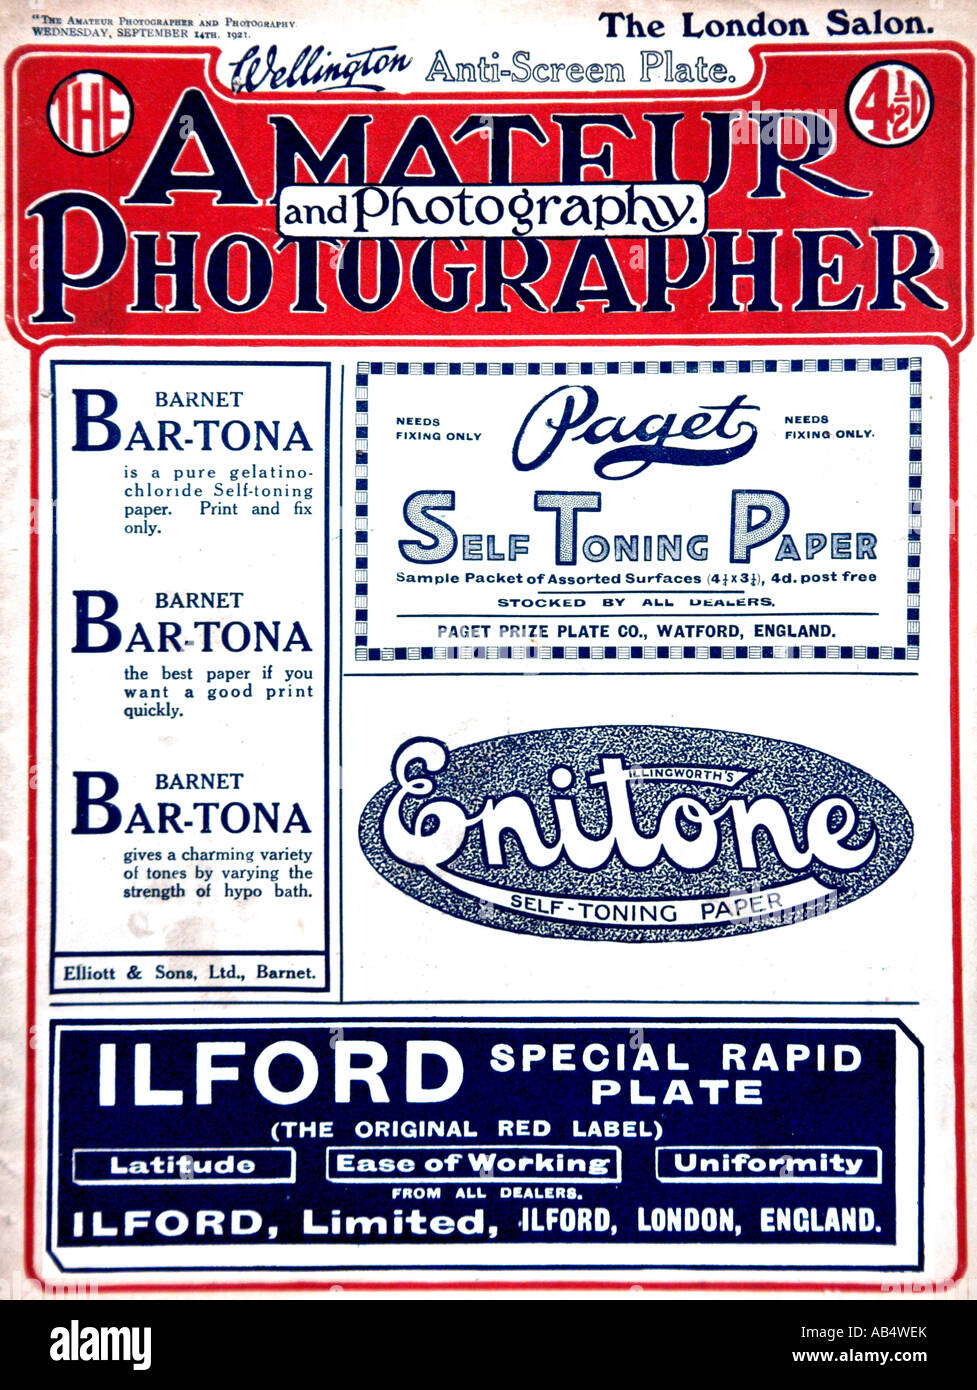 Amateur Photographer and Photography Magazine 14 September 1921  FOR EDITORIAL USE ONLY Stock Photo